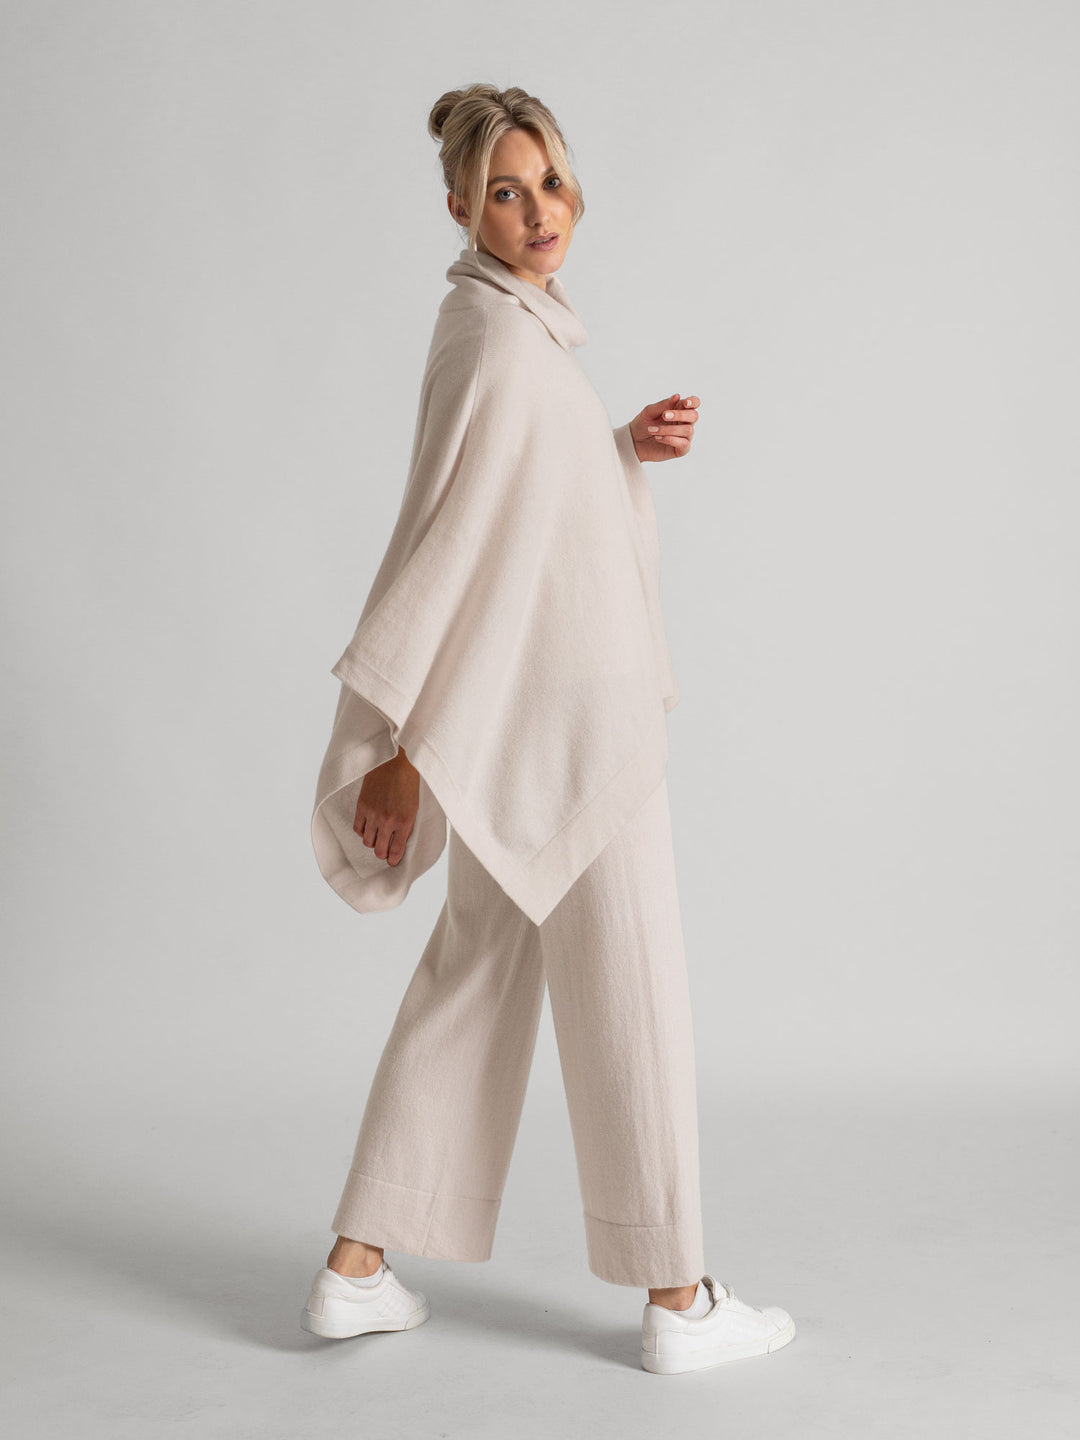 Cashmere poncho, turtle neck in 100% pure cashmere. Color: pearl. Scandinavian design by Kashmina.